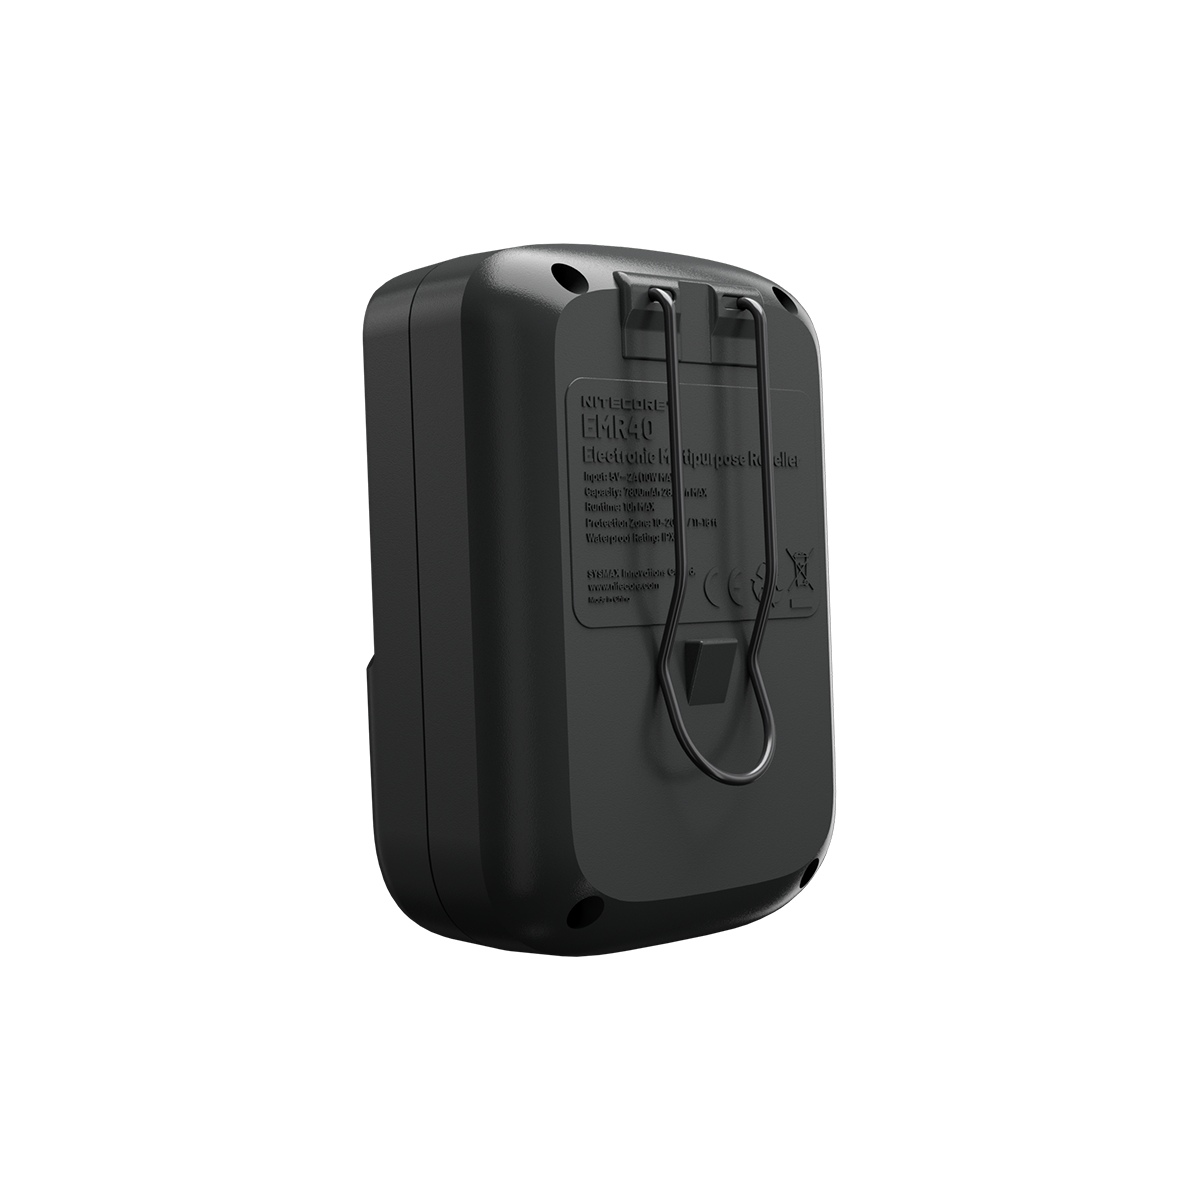 EMR40 Electronic Mosquito Repellent